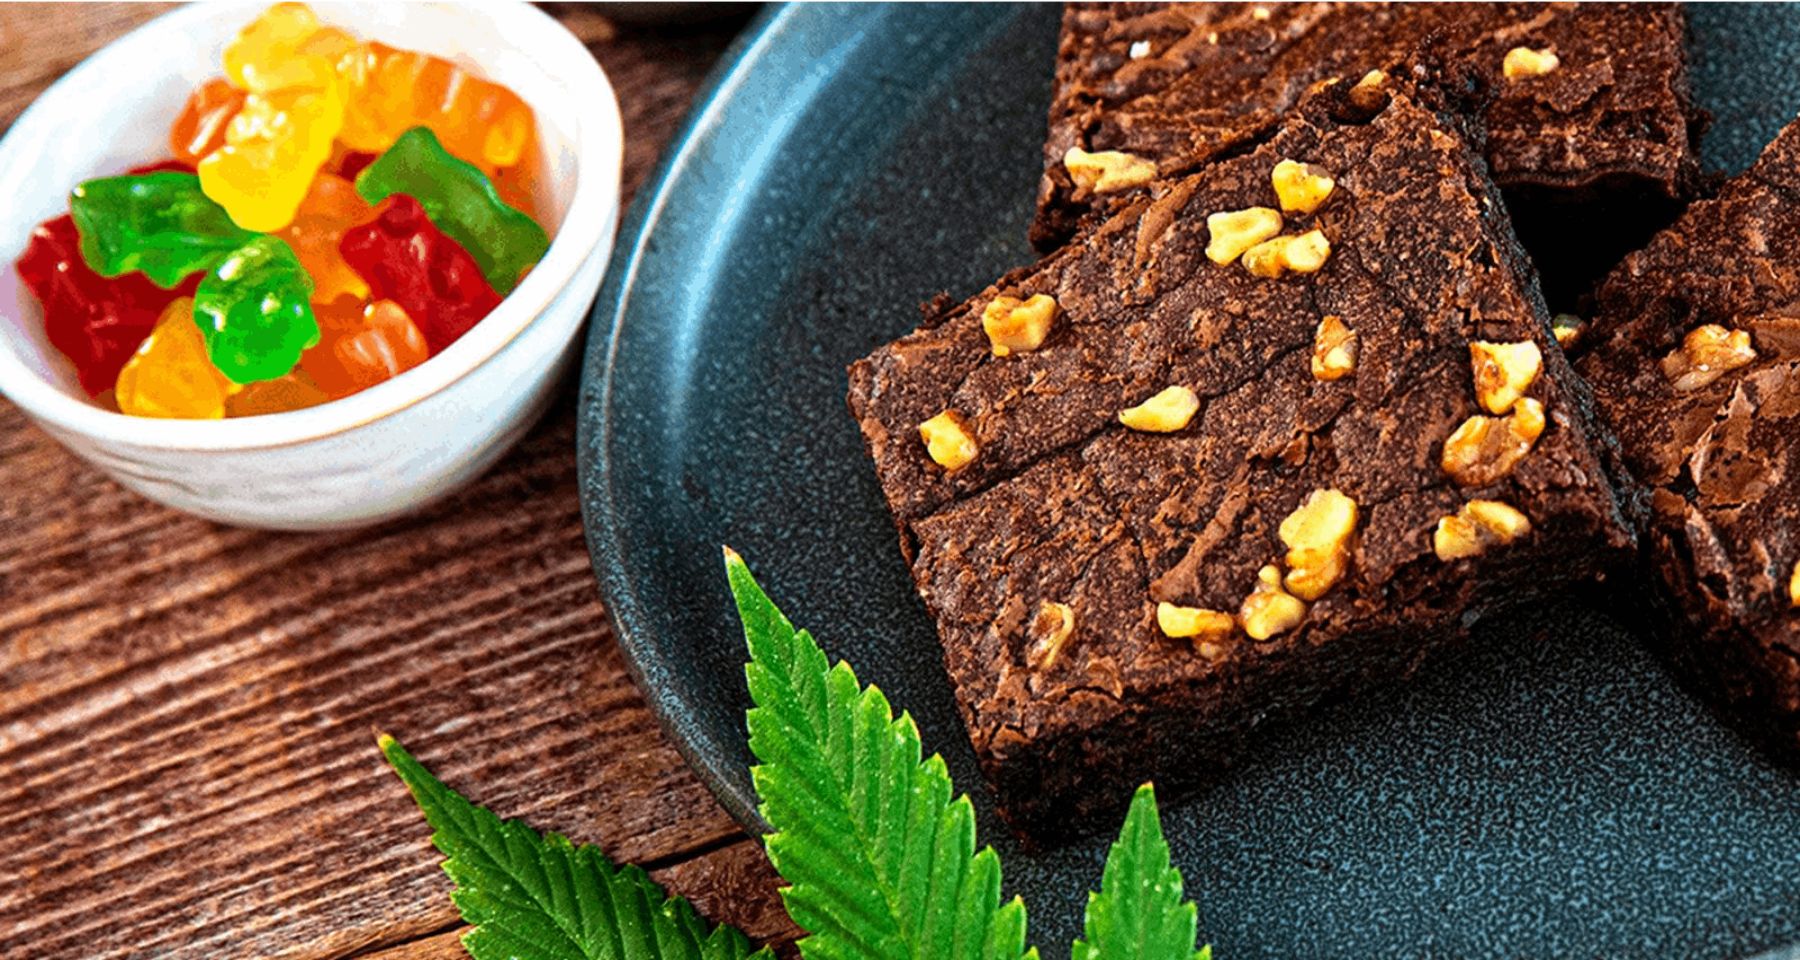 Cannabis for sleep edibles is a great option for those who want a natural way to promote relaxation and ease the mind before bedtime. 